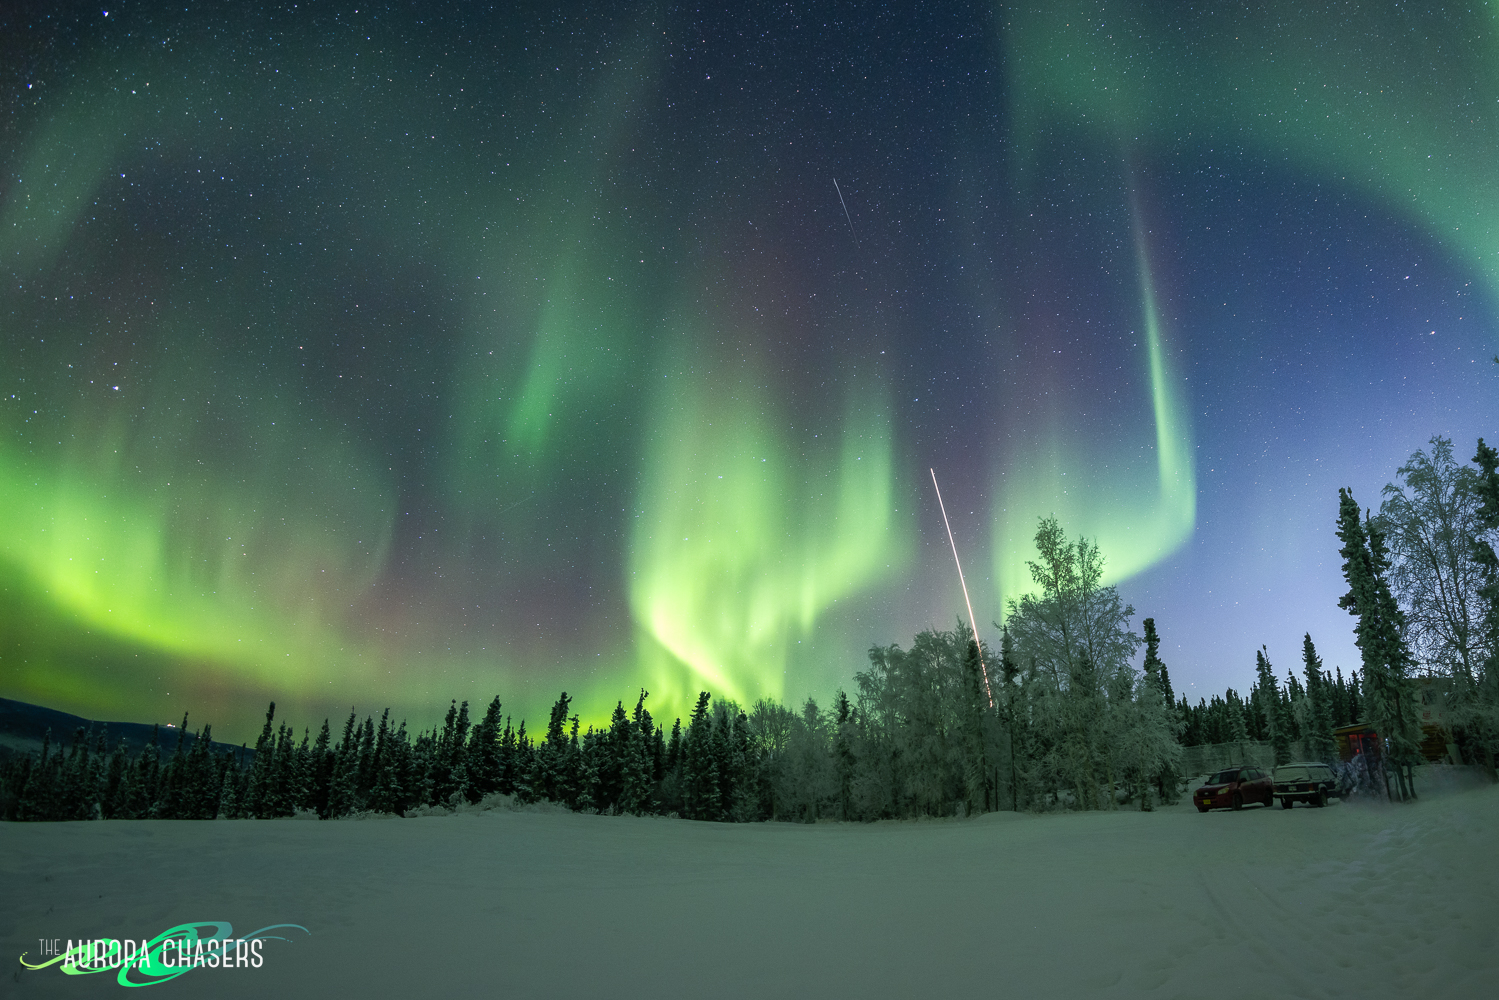 NASA's Dissipation Mission blasts off in a sounding rocket into the Aurora Borealis